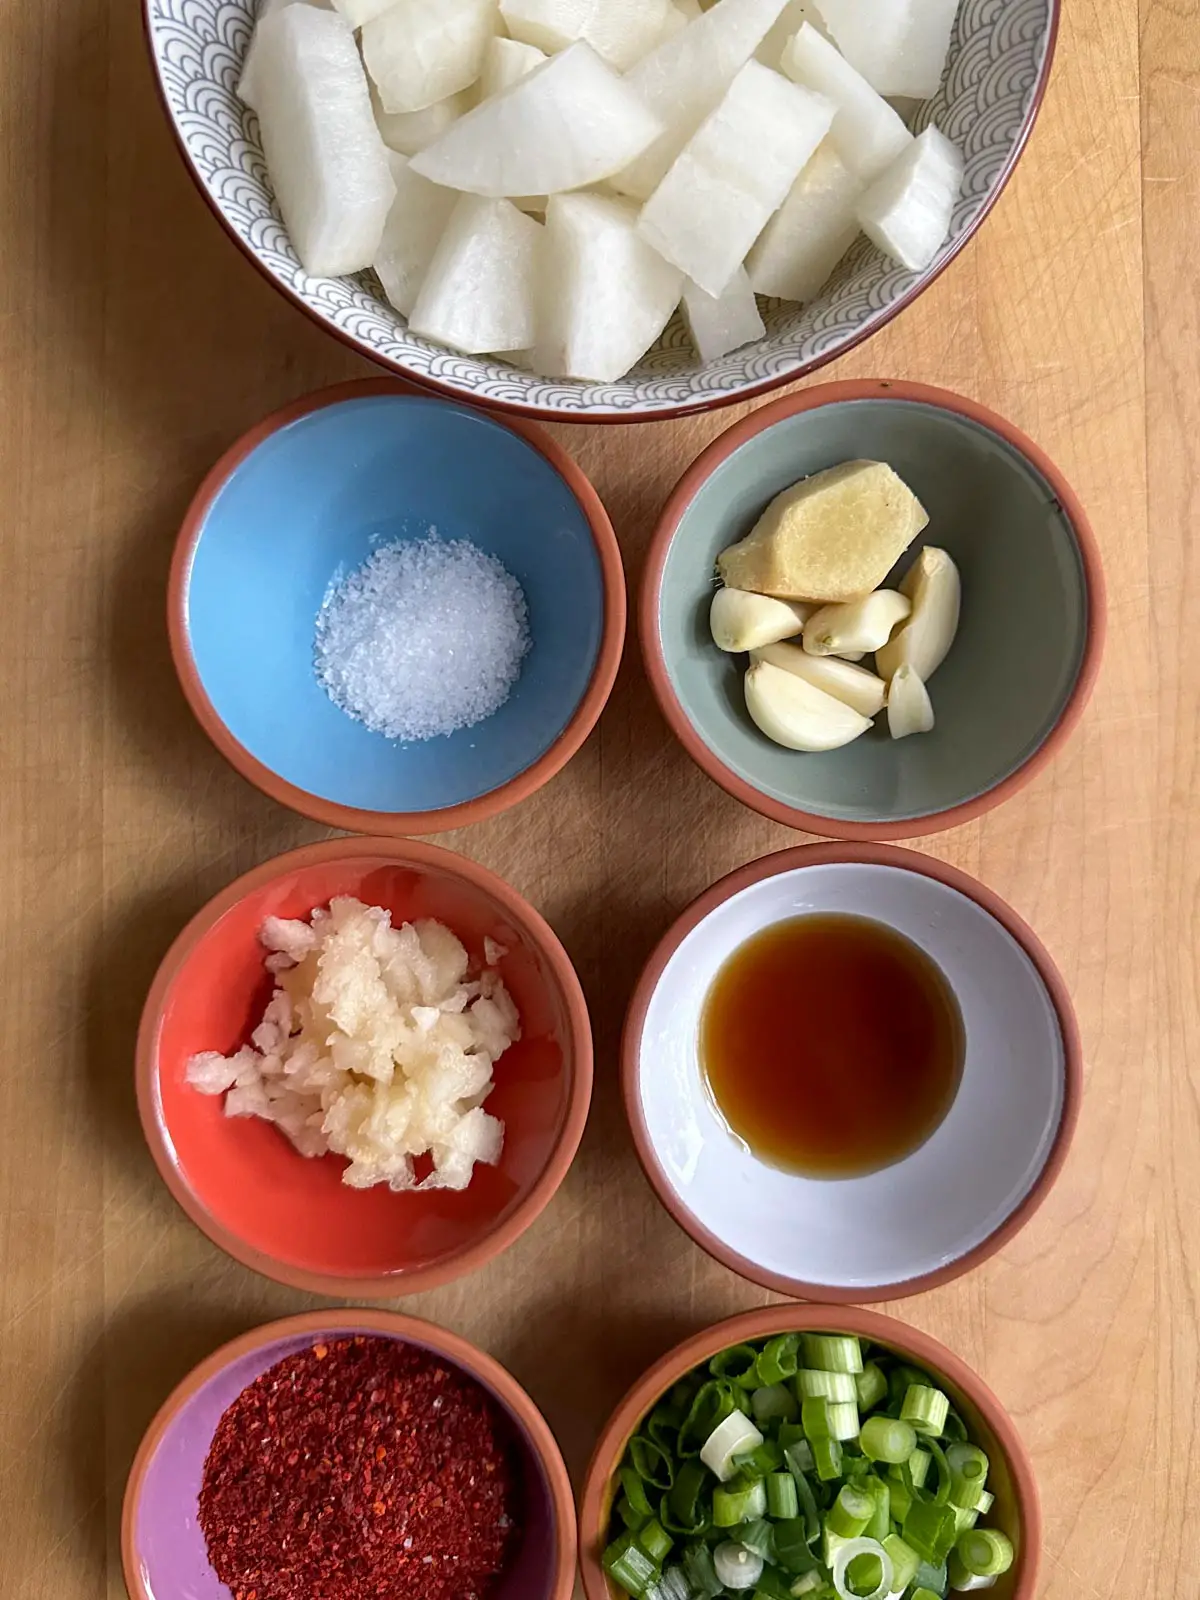 A bowl containing cubed pieces of daikon radish, and small bowls containing salt, ginger and garlic, Asian pear, fish sauce, red pepper powder, and green onions.